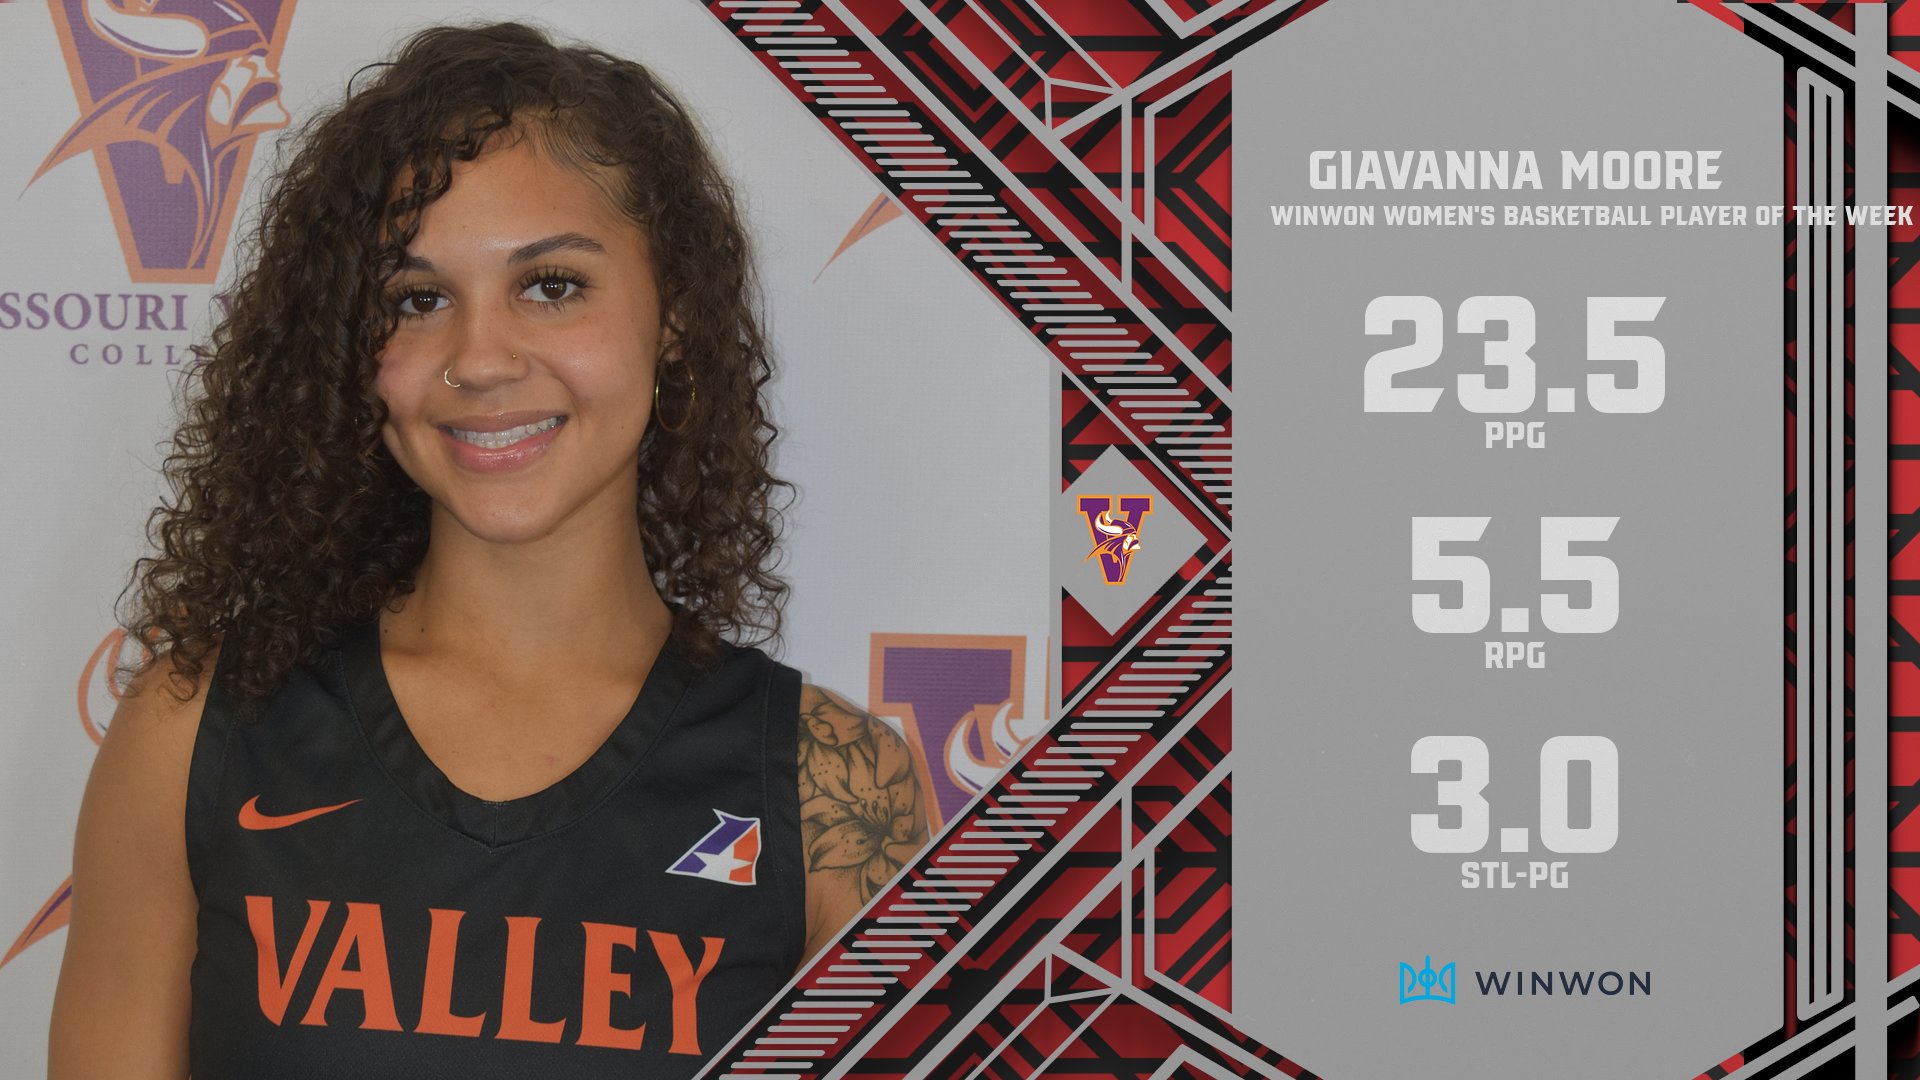 Giavanna Moore of Missouri Valley Selected WinWon Women&rsquo;s Basketball Player of the Week Honors